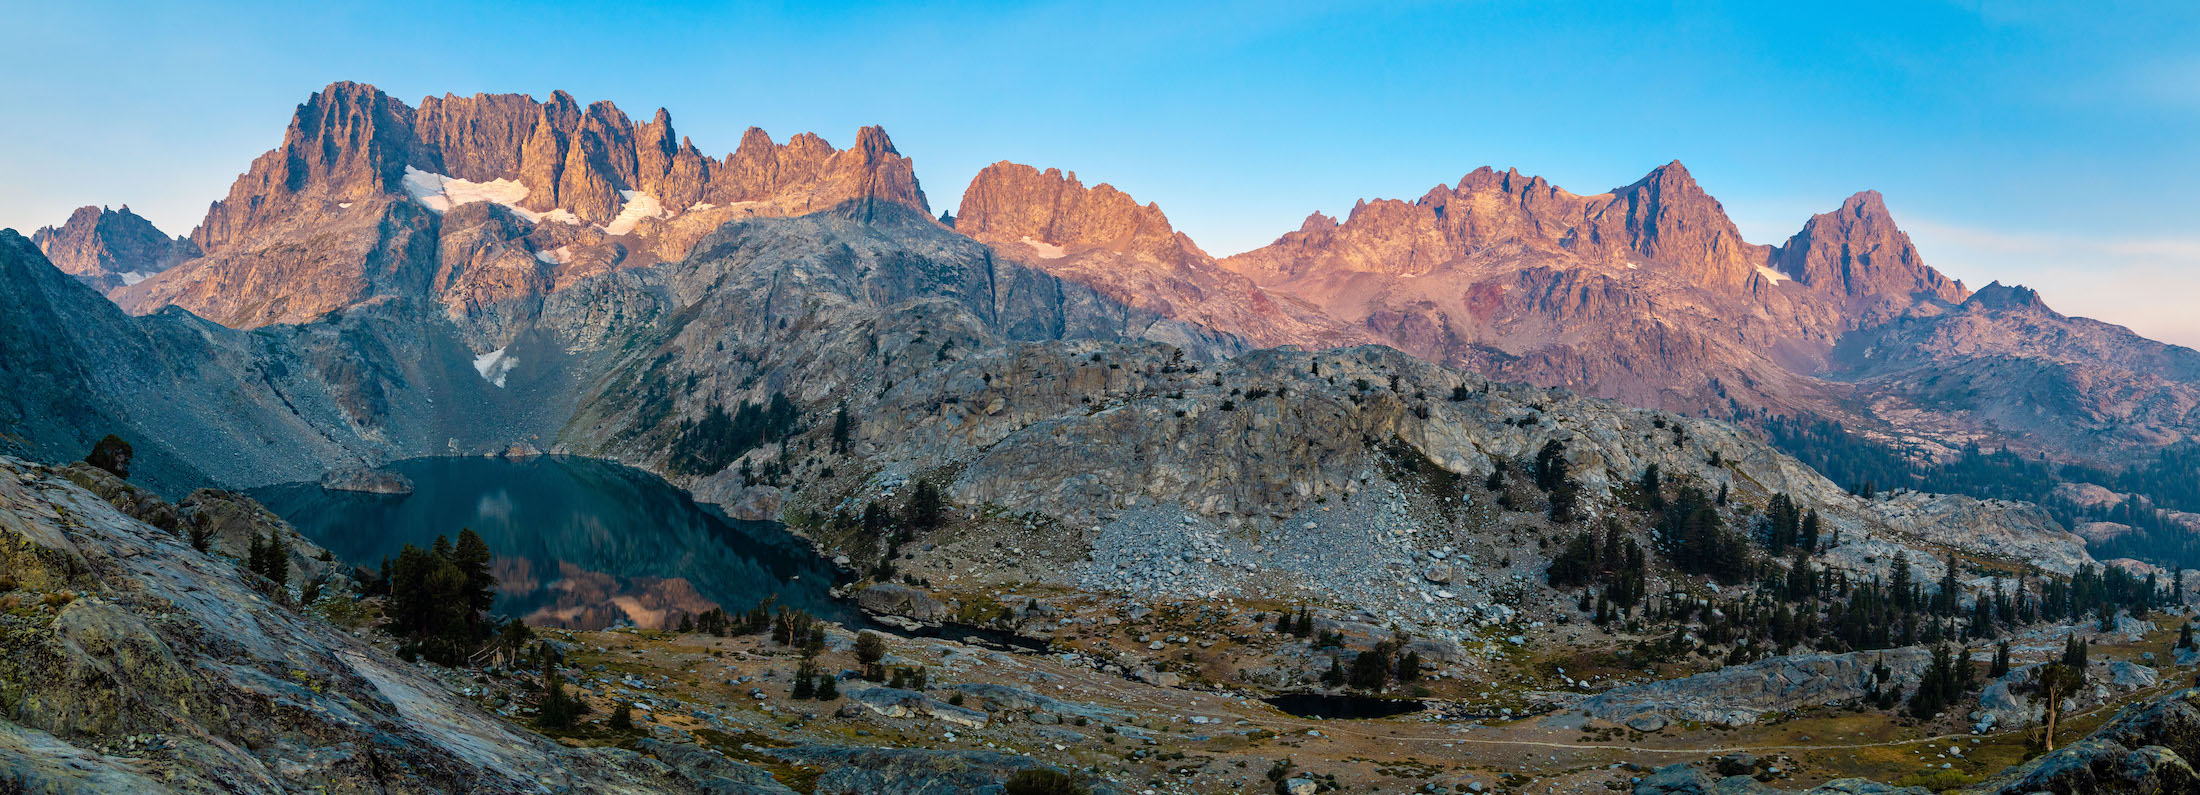 Minarets and the Ritter Range in the Ansel Adams Wilderness. Photo by Brock Dallman